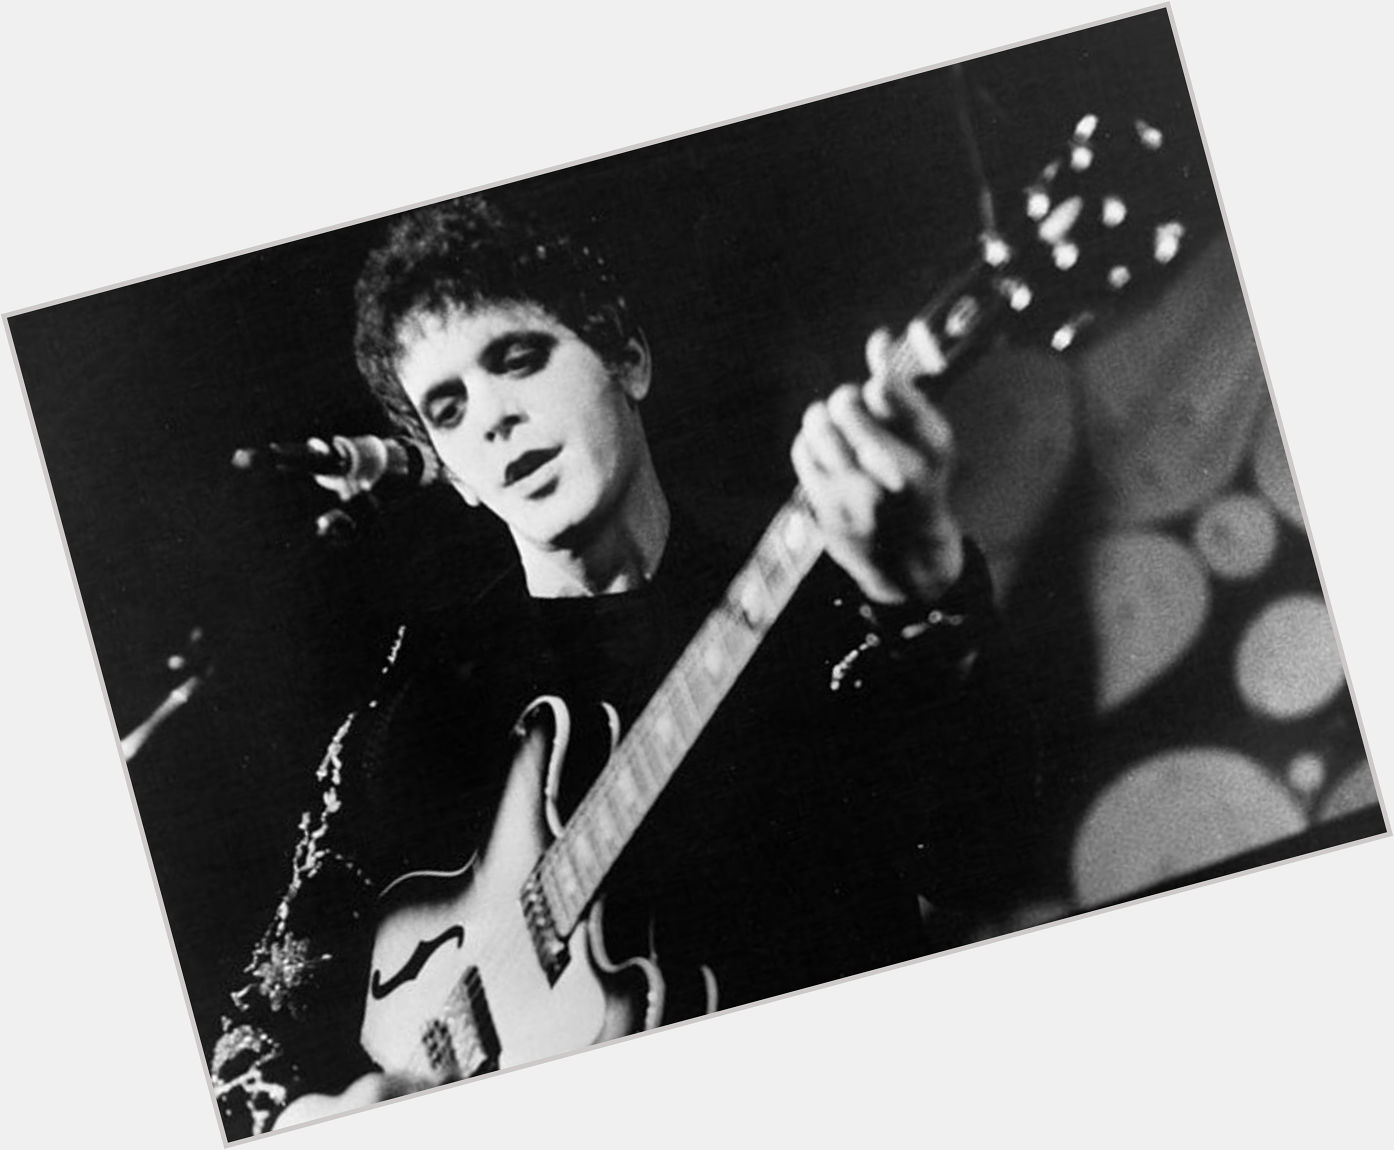 Happy birthday Lou Reed. Born on this day in 1942 